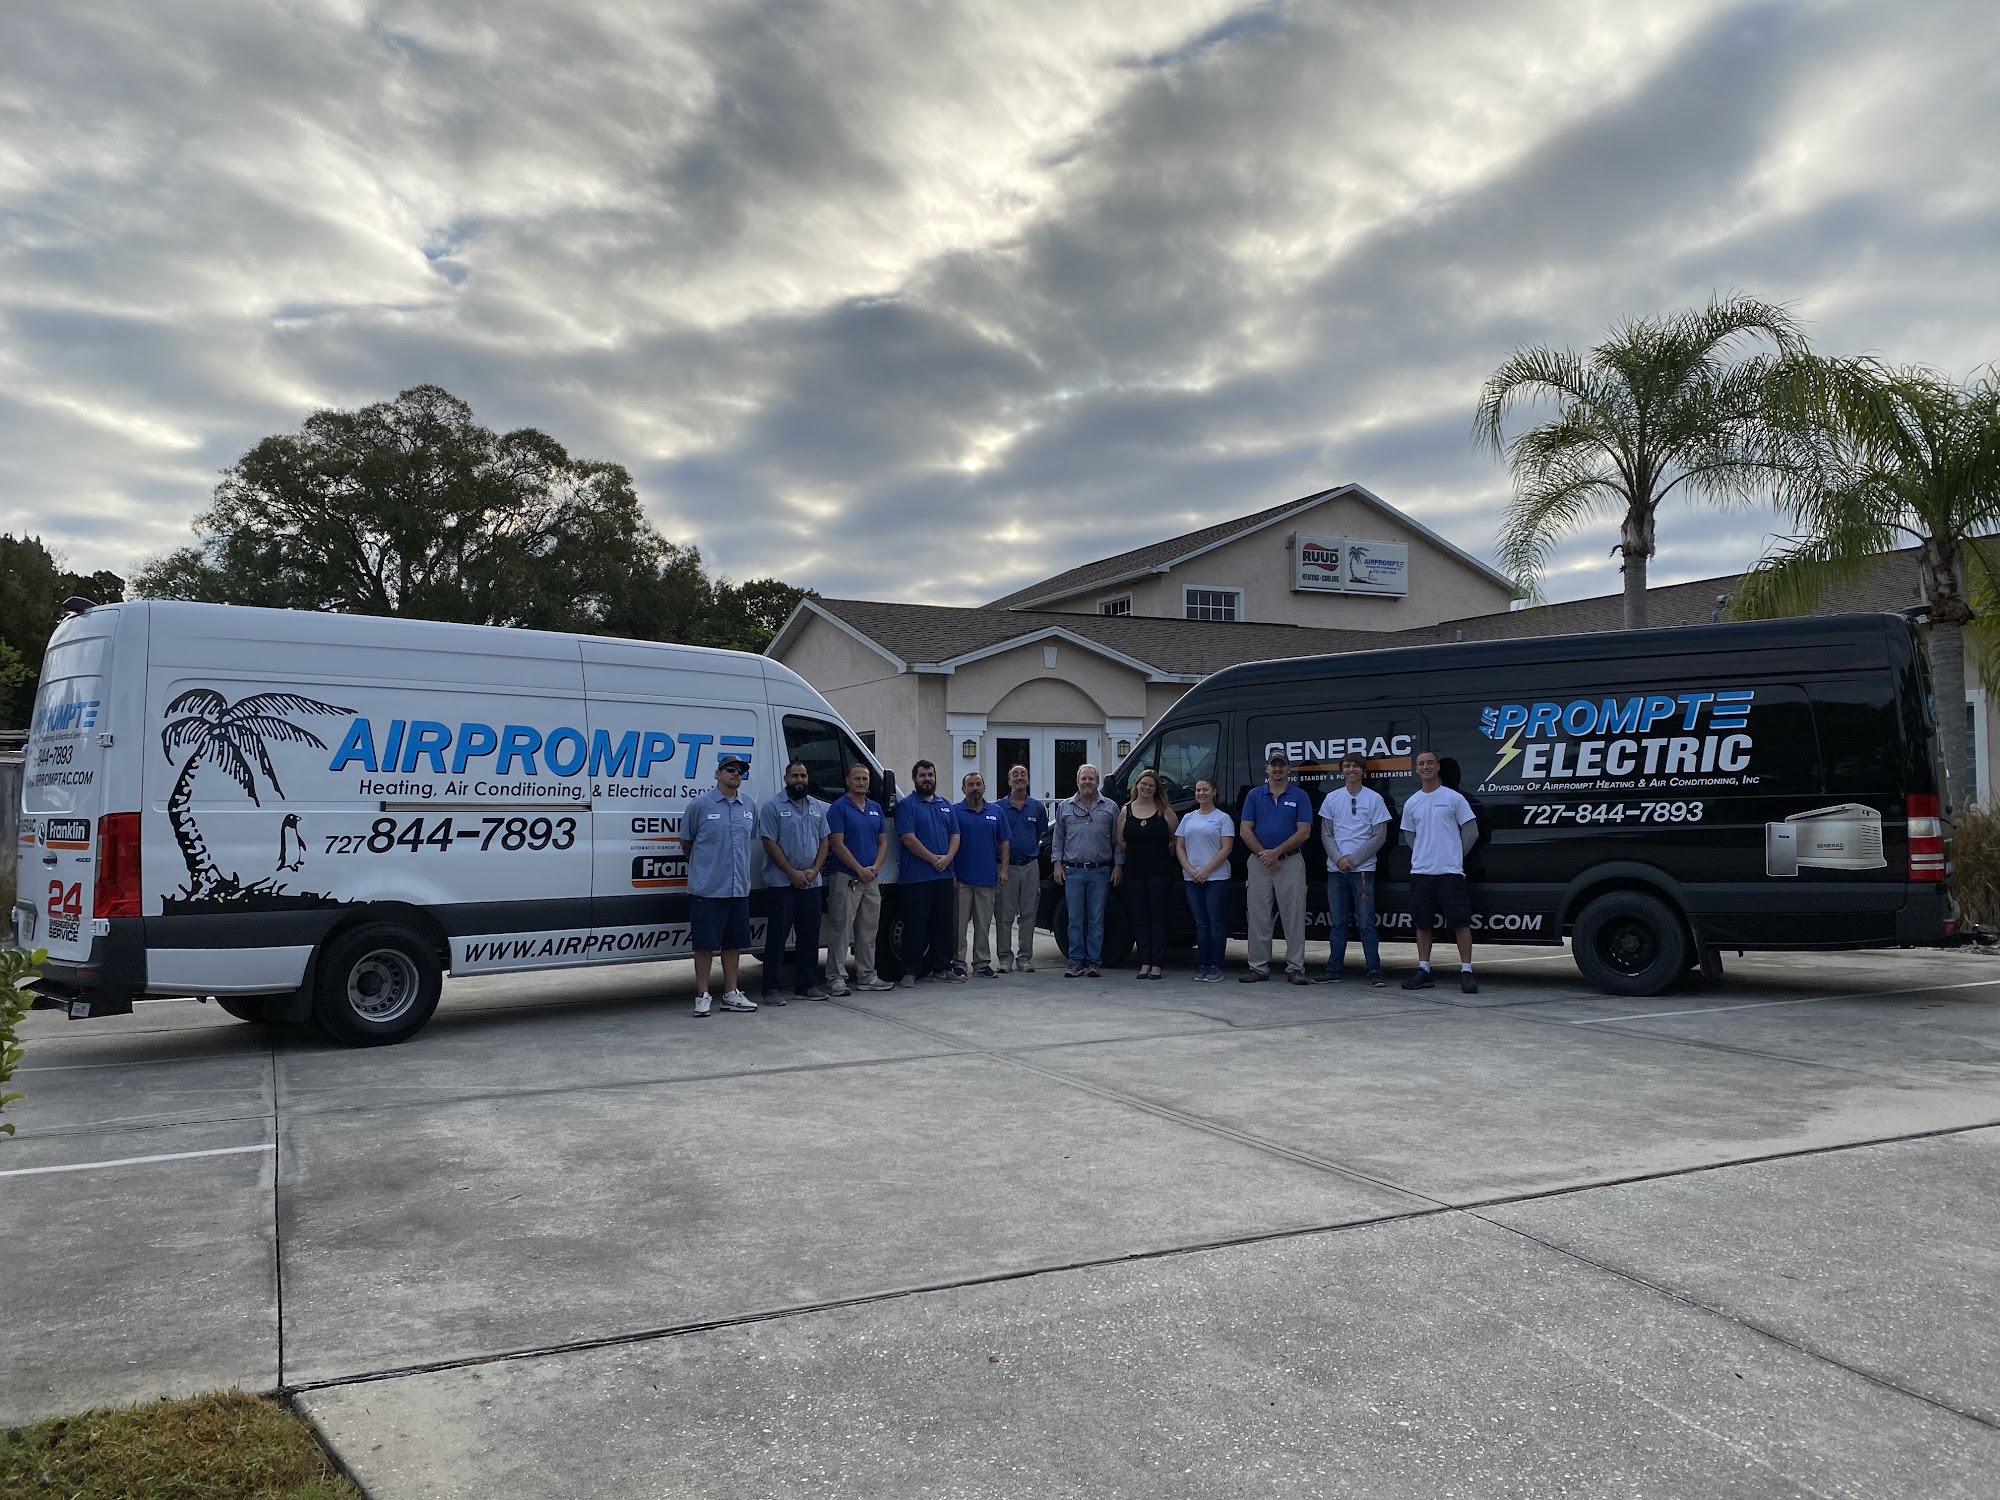 Airprompt Air Conditioning & Electric